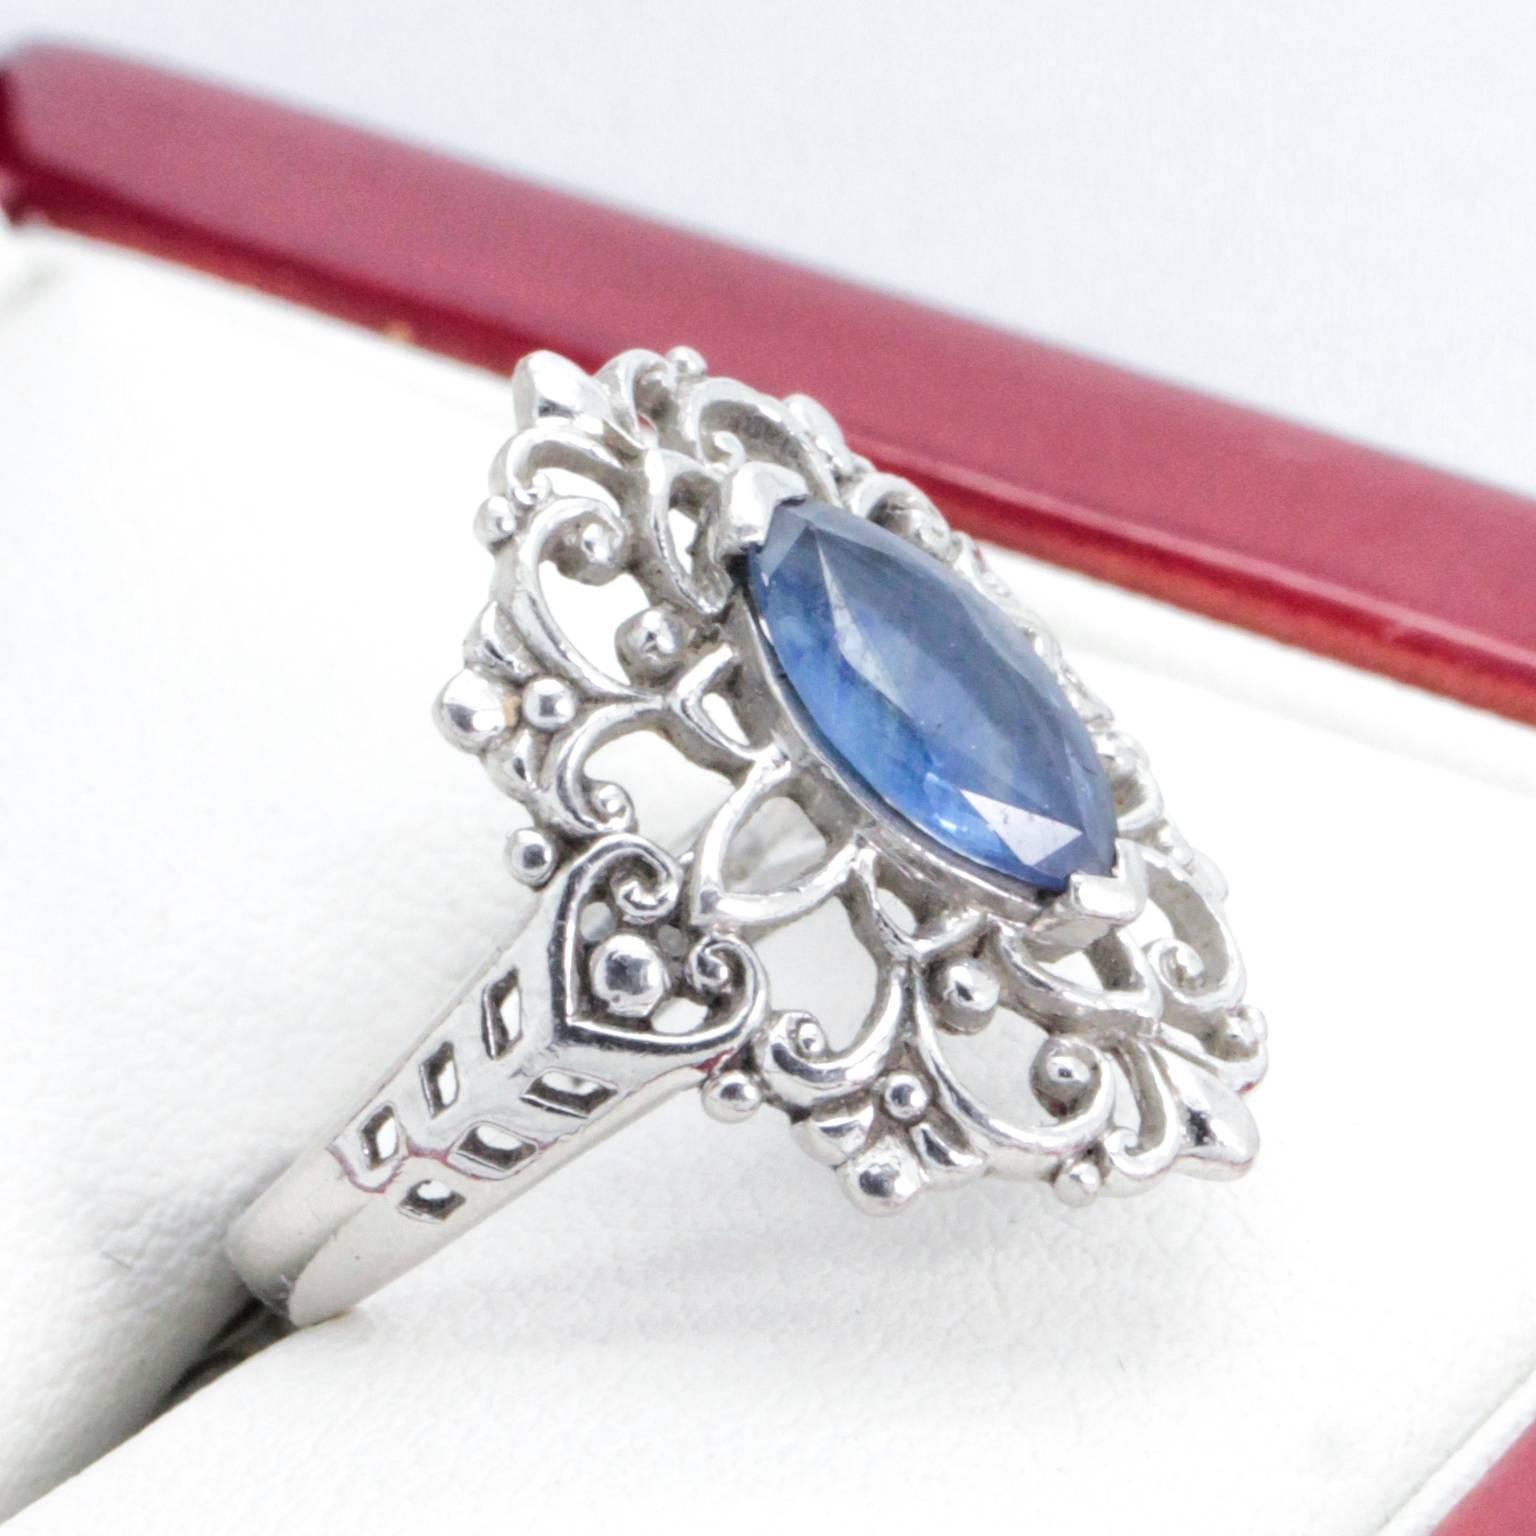 Platinum Vintage Marquise-Cut Sapphire and Filigree Ring In Excellent Condition For Sale In Sydney CBD, AU